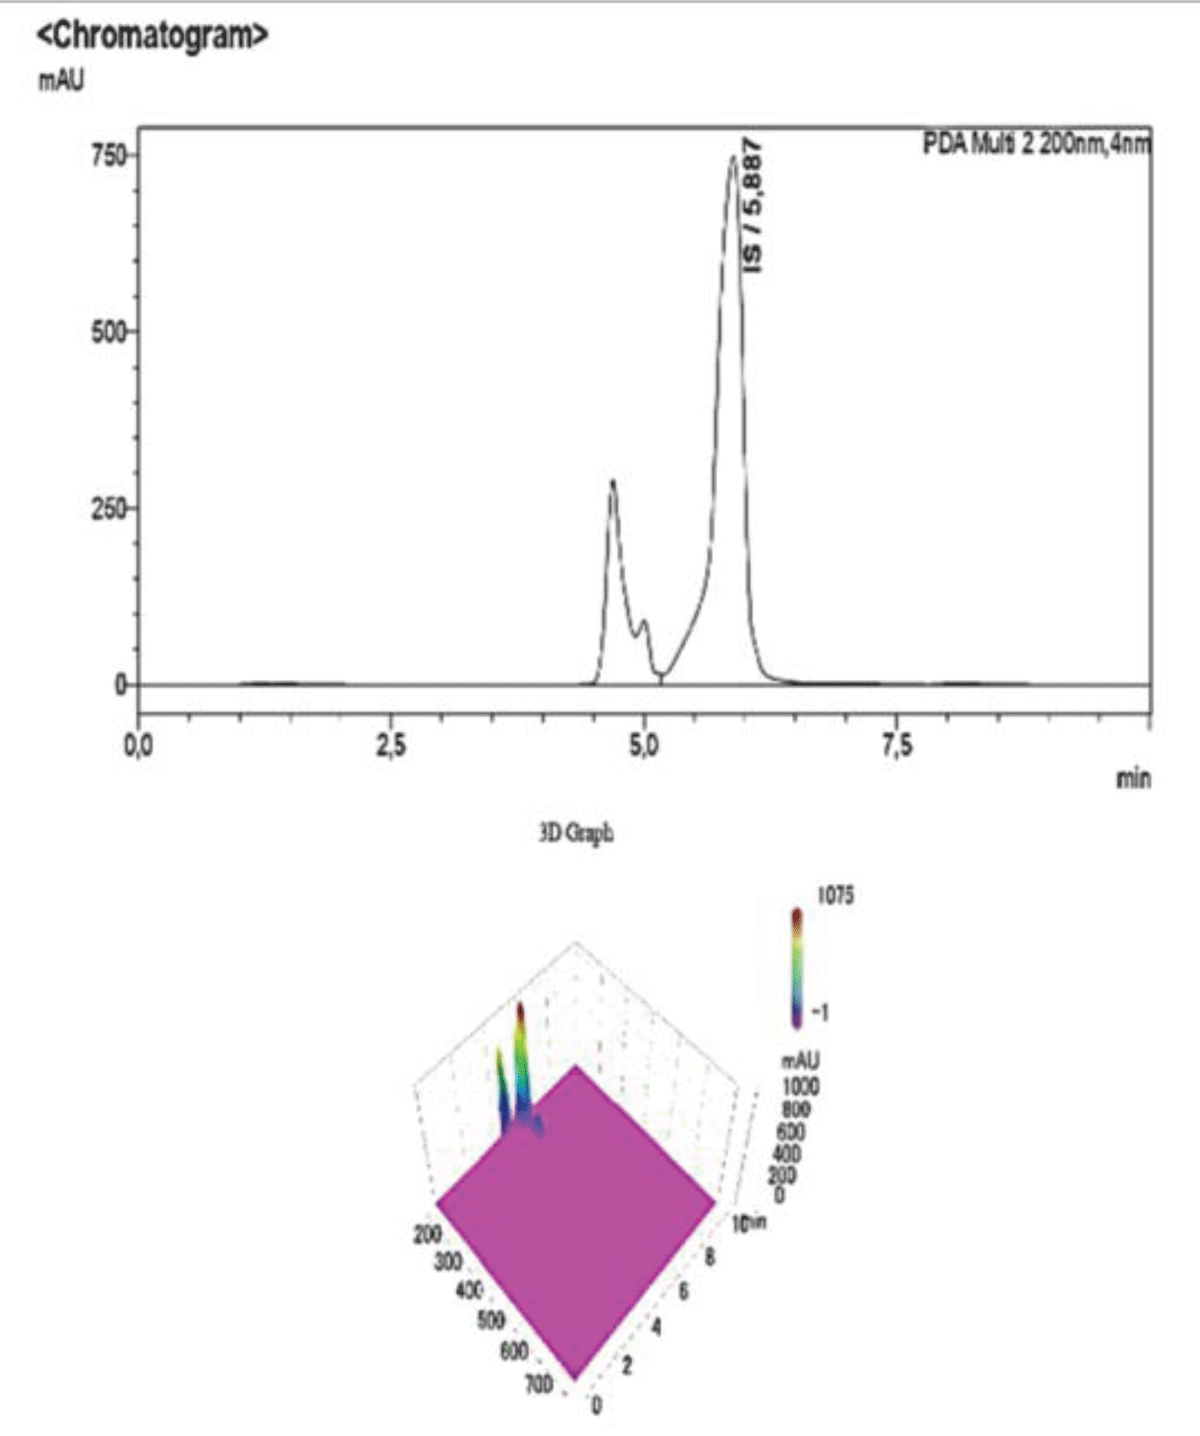 HPLC-UV Chromatogram and 3D Graph of the peaks referring to IS and PCS at a concentration ratio of 6:1 respectively. The peak for PCS is not detected at this concentration, whereas IS is clearly visible albeit with much lower intensity due to the dilution, as it is also shown by the scale of the y-axis.